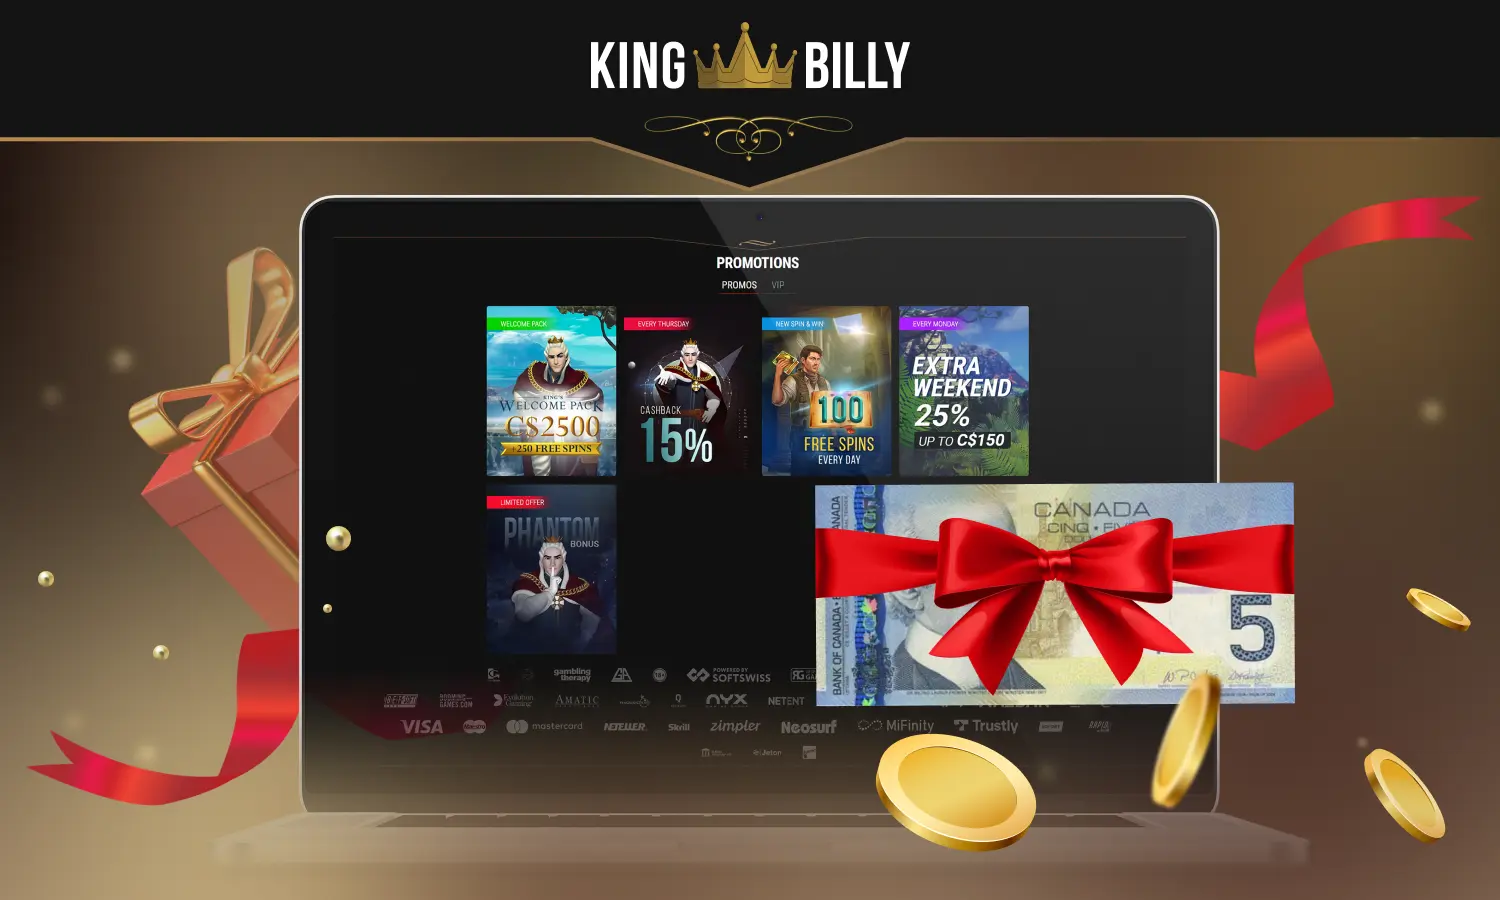 King Billy casino often releases various no deposit bonus for Canadian players